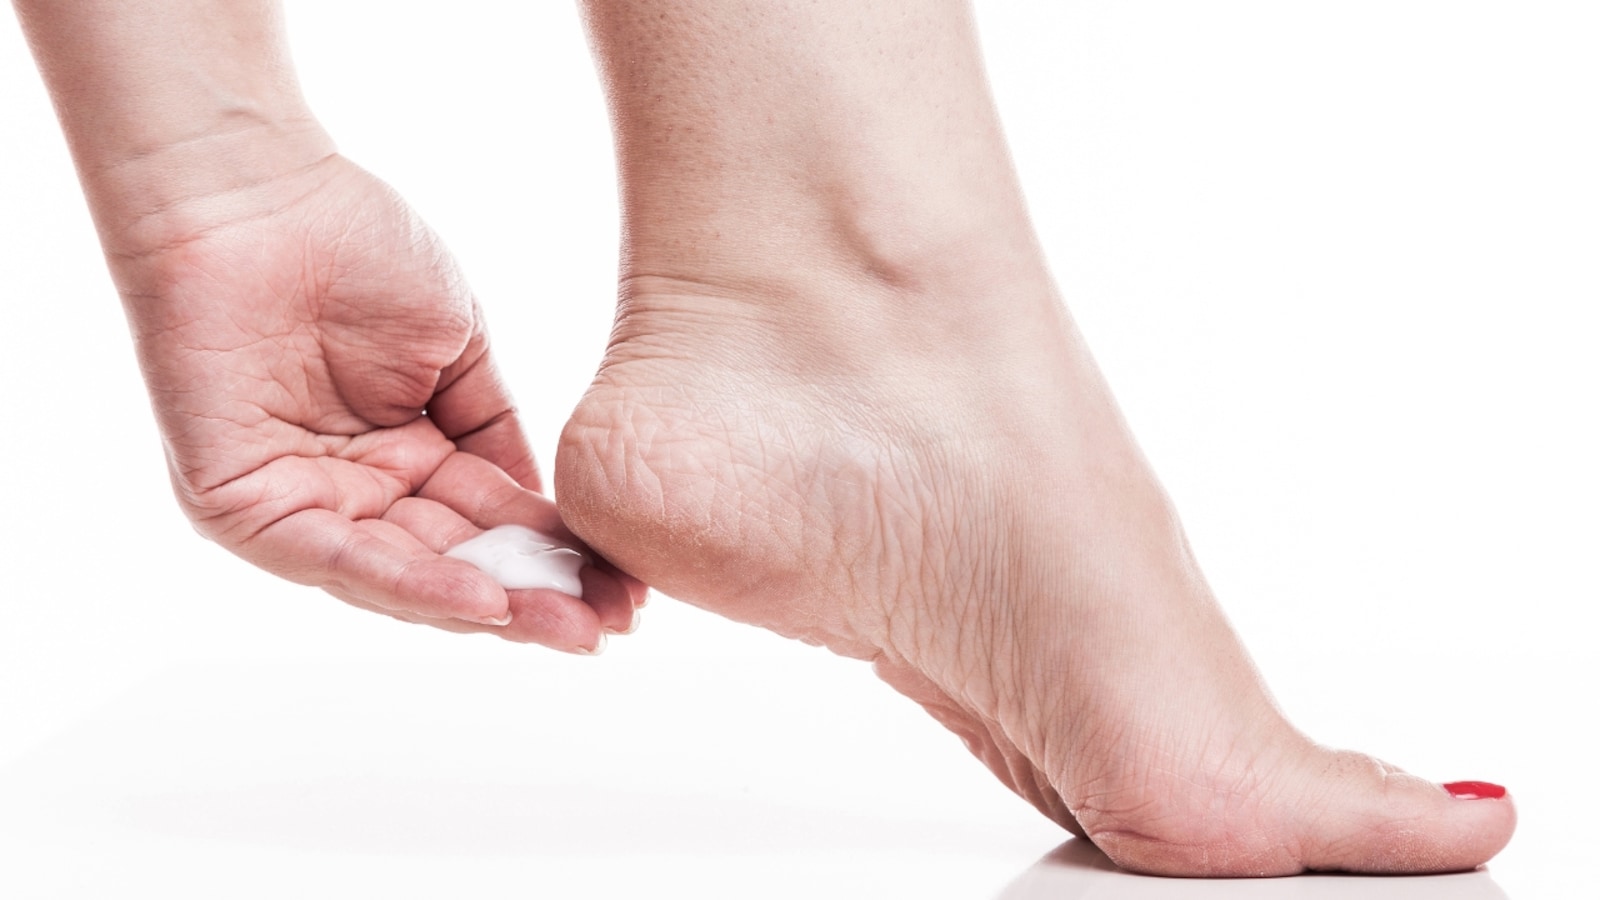 Home remedies for dry, flaky feet in winter: Heal it with coconut